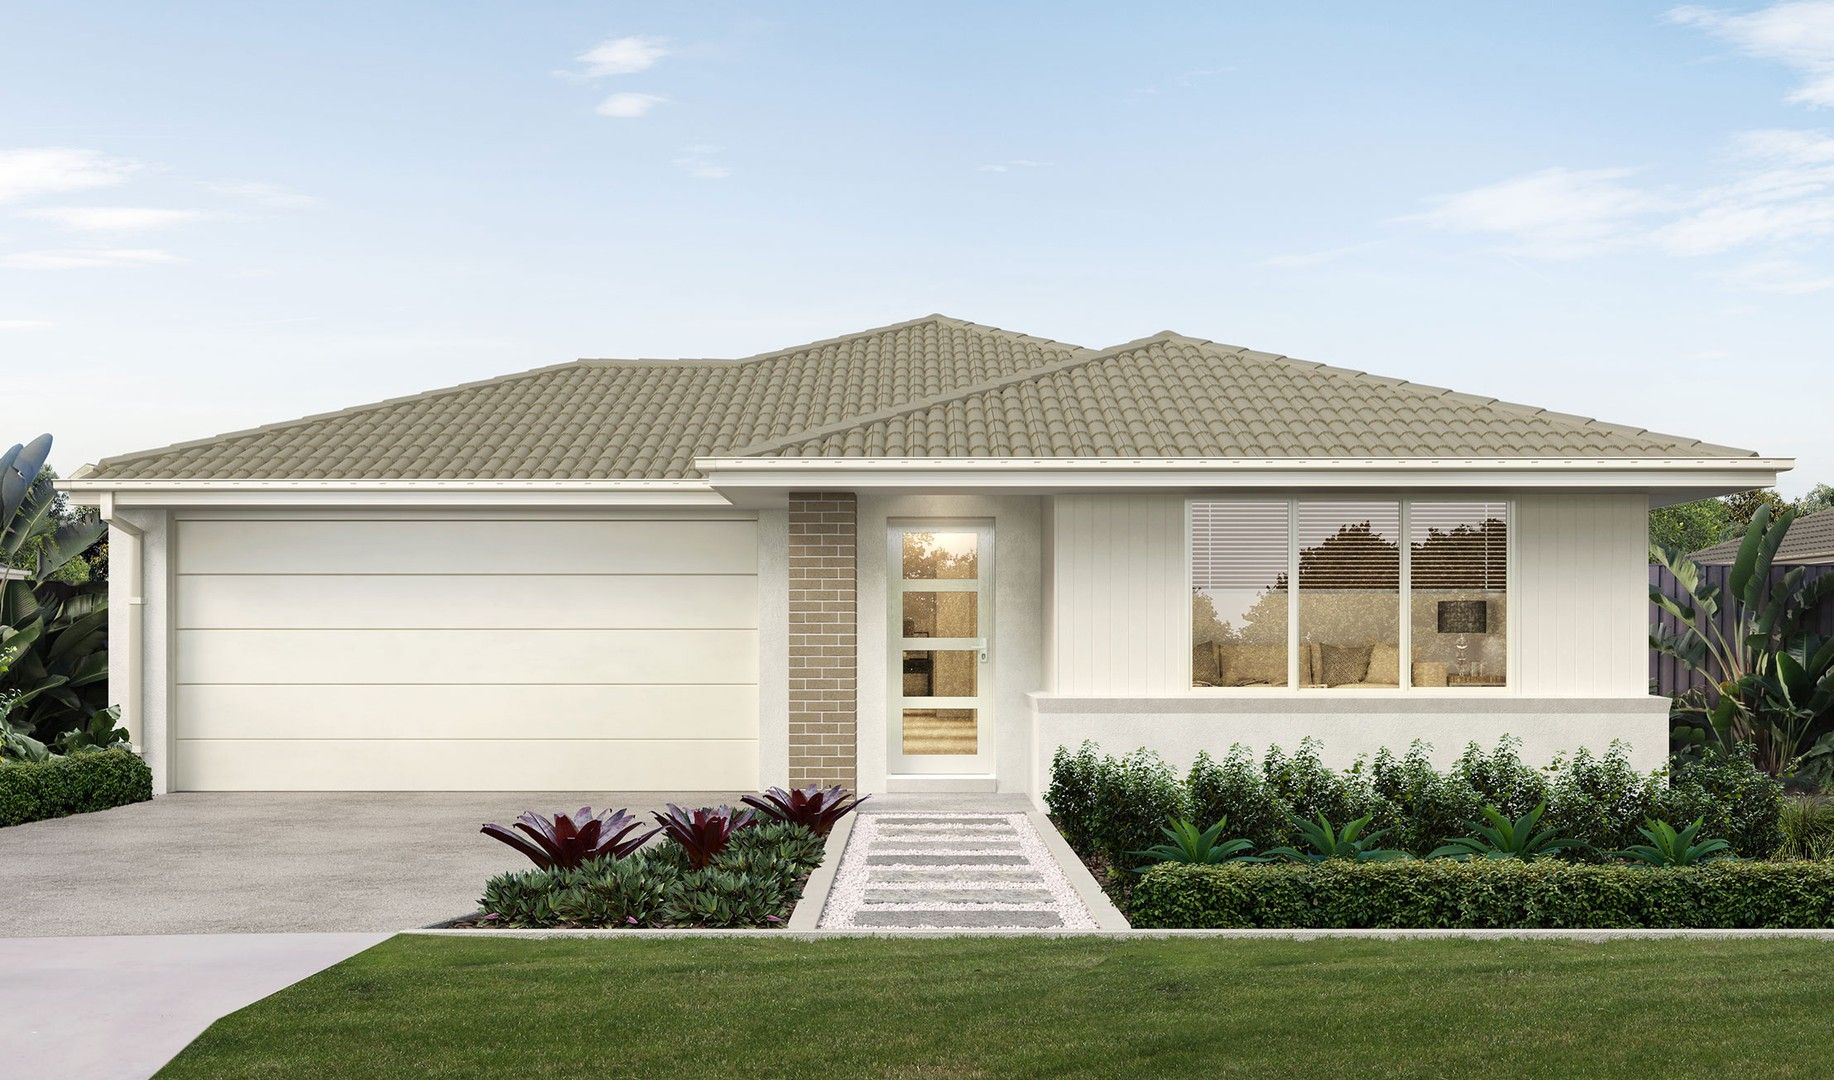 4 bedrooms New House & Land in Lot 14 New Rd BOONDALL QLD, 4034